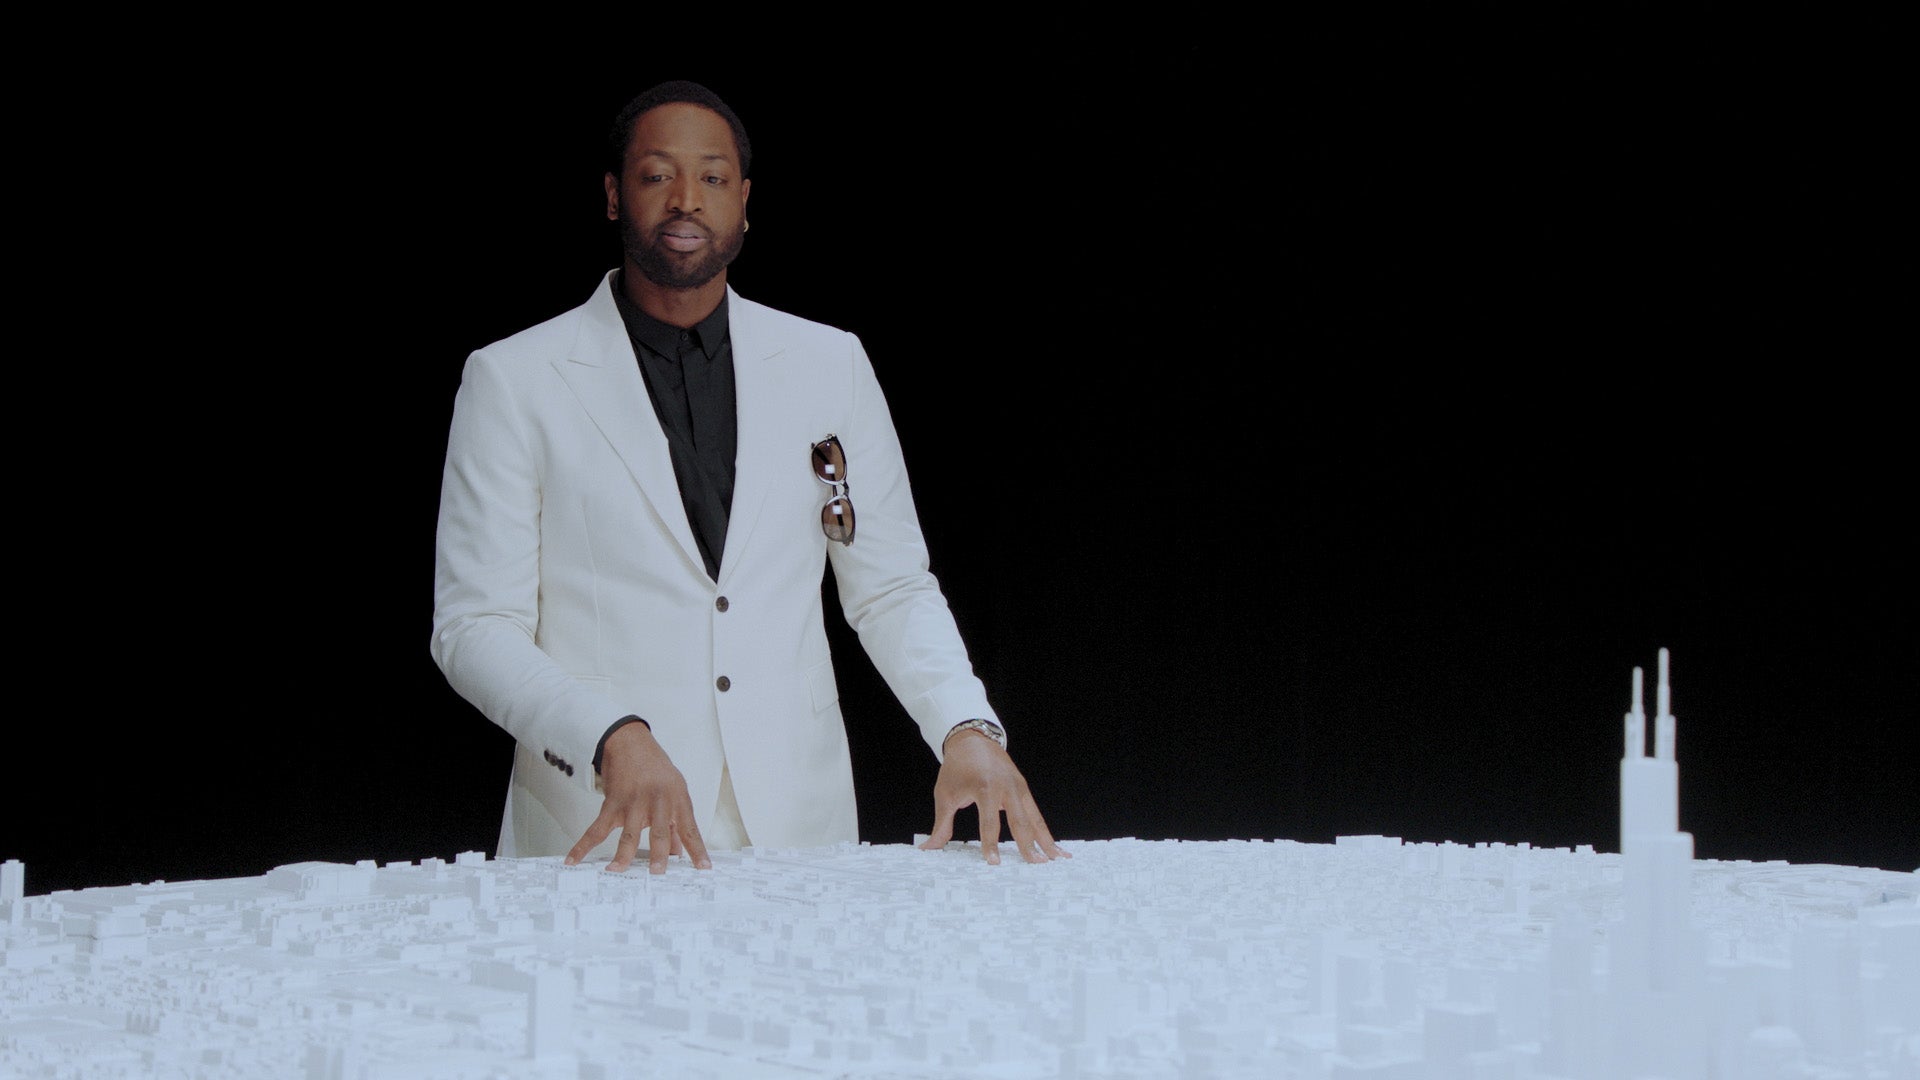 Dwayne Wade with Microscape's 15 foot diameter circular model of Chicago